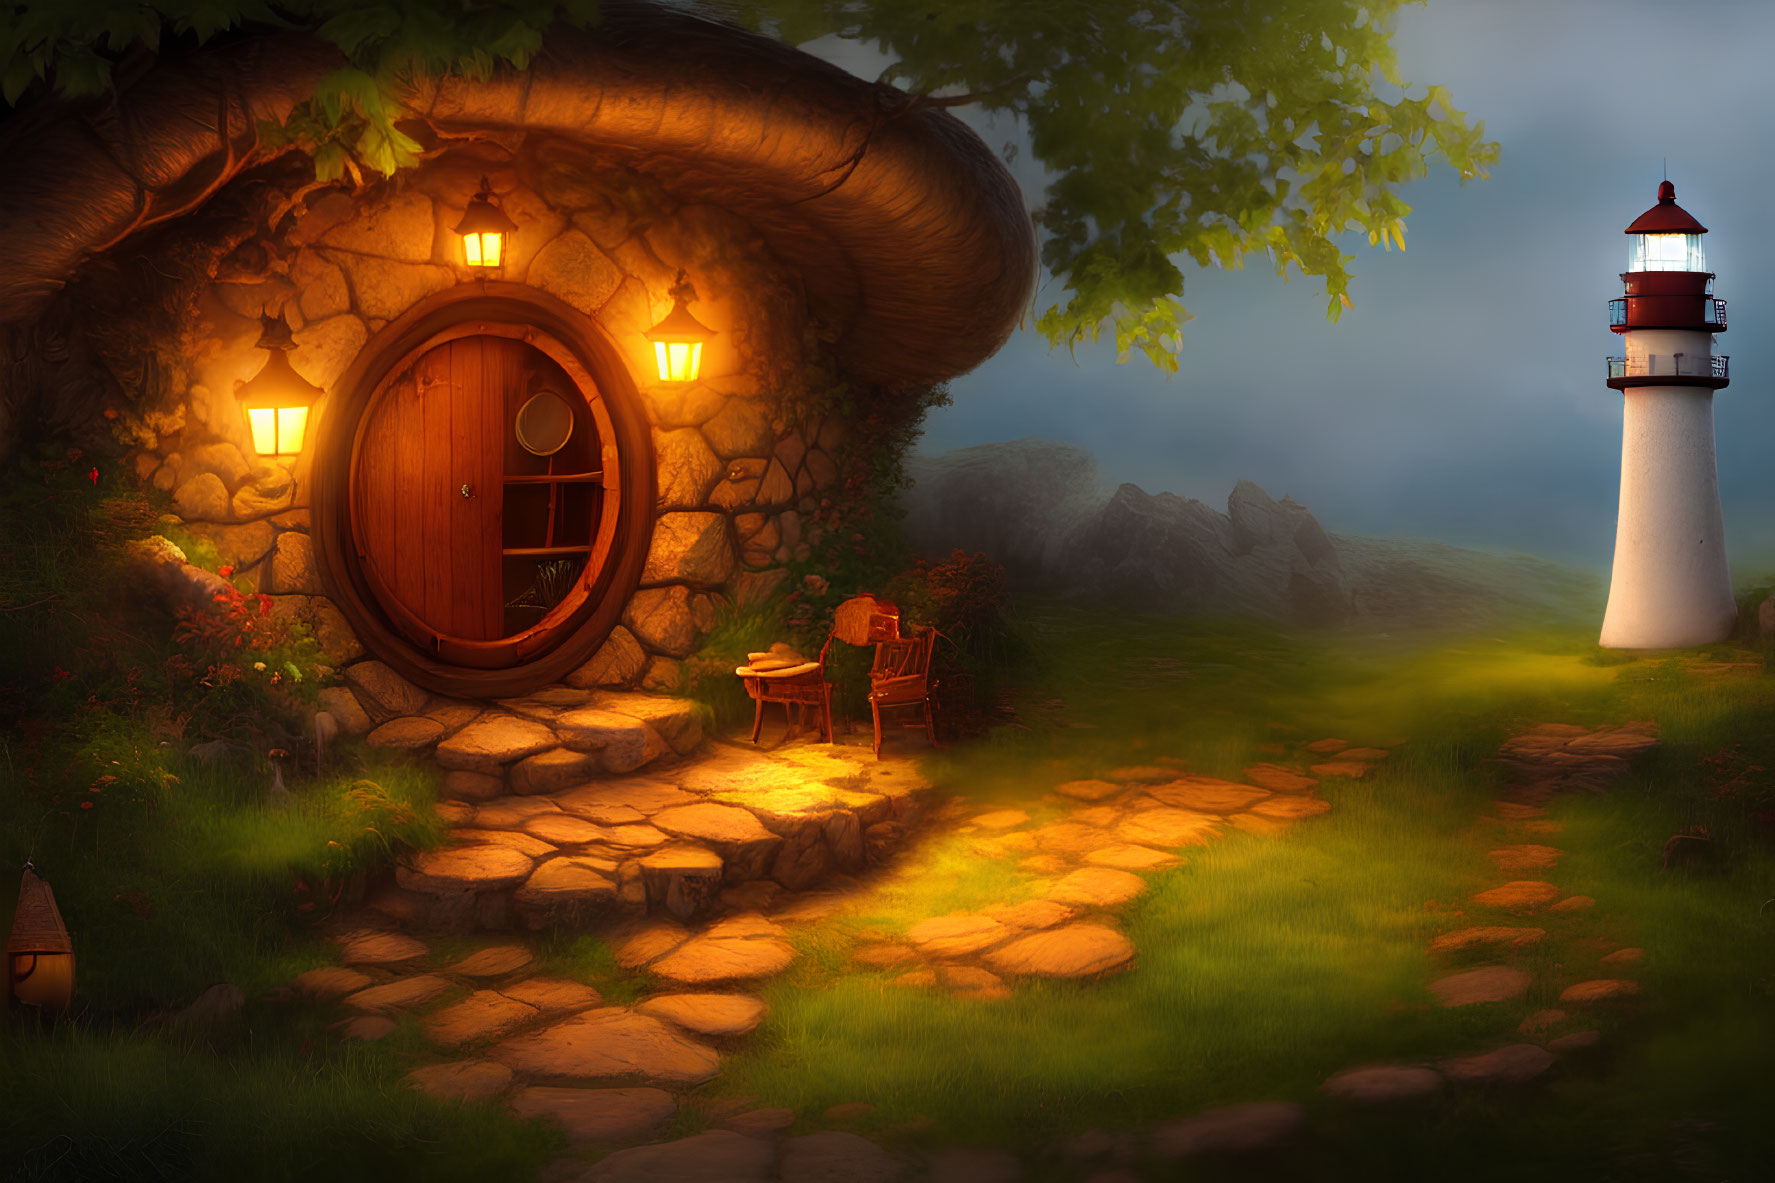 Enchanting cottage with circular door under mushroom cap, stone path to distant lighthouse in misty